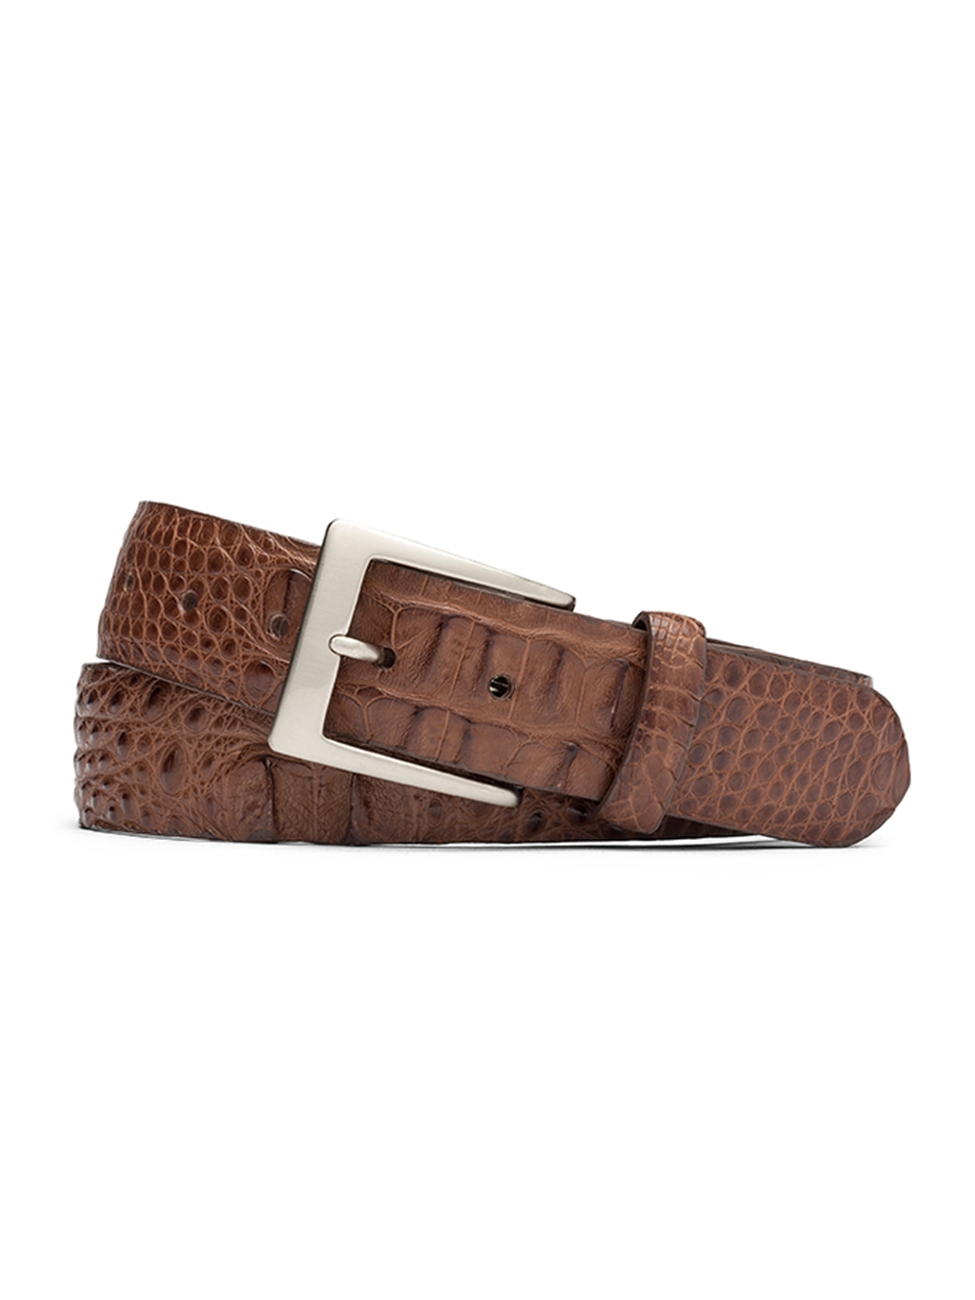 1-3/8 Matte American Alligator Belt with Brushed Nickel and Gold Buck -  w.kleinberg